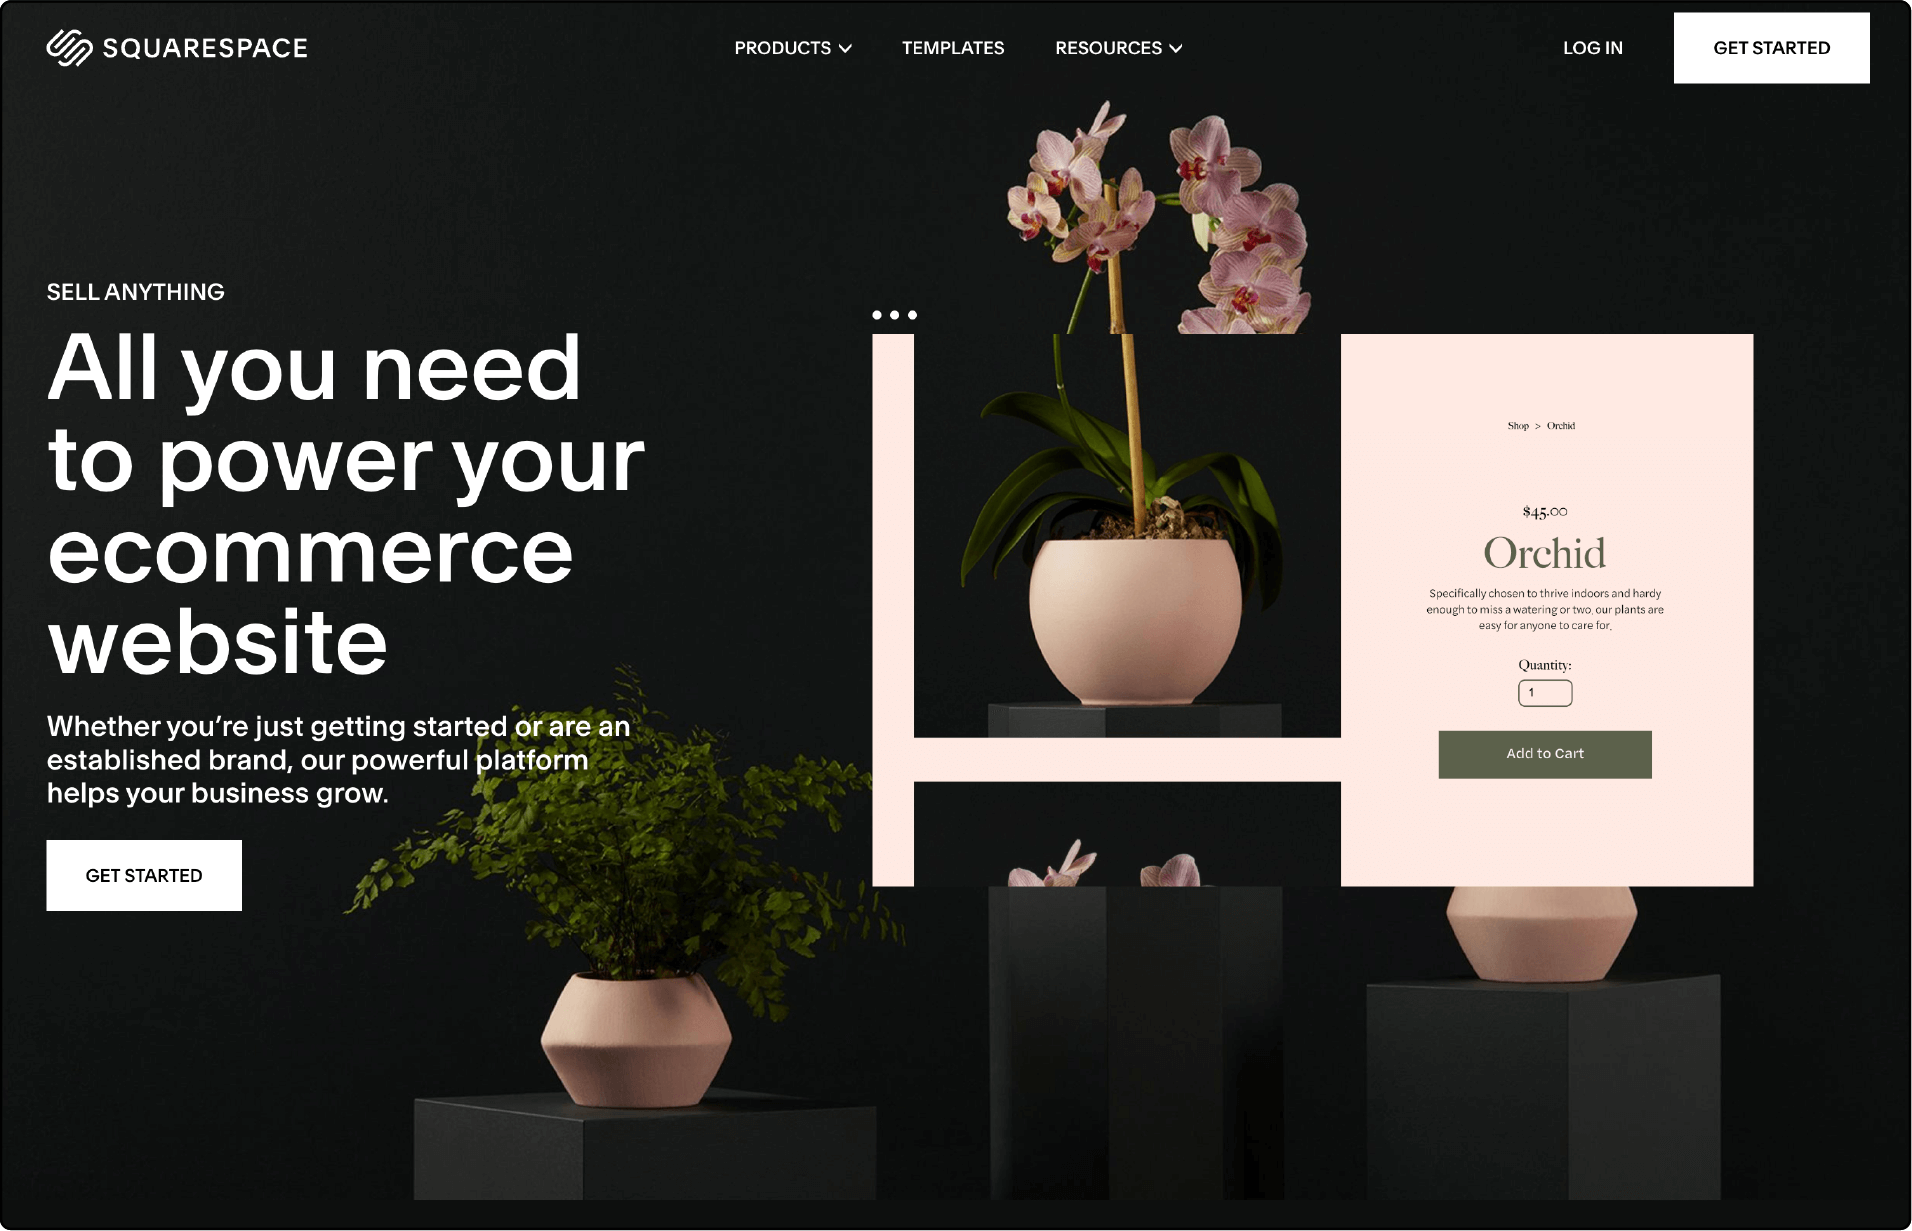 Squarespace Commerce interface with innovative design templates